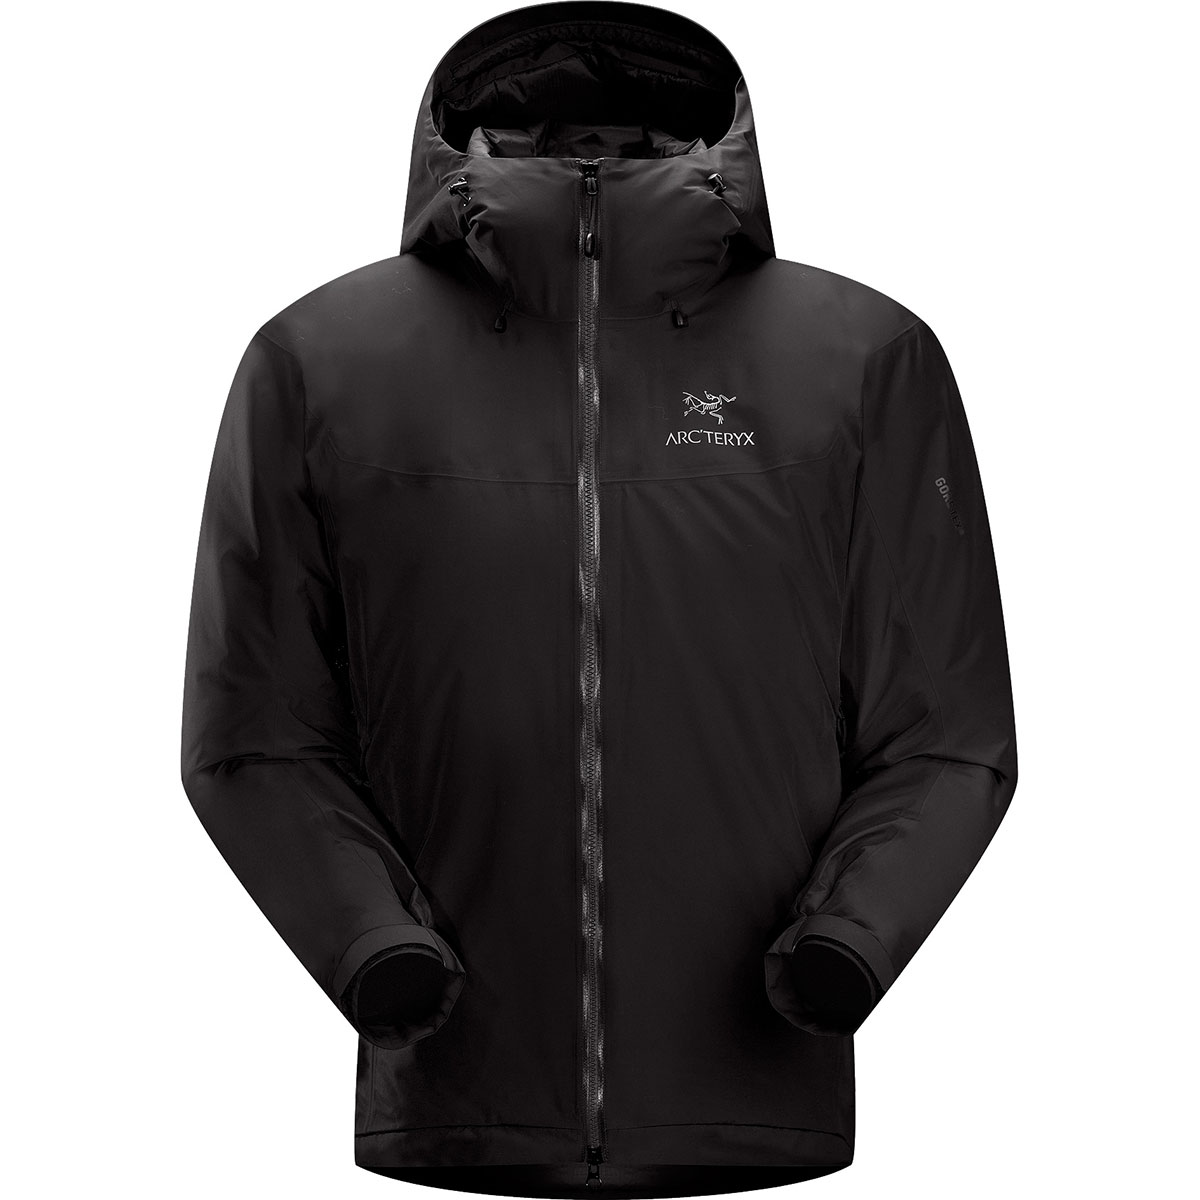 Arc'teryx Fission SL Jacket, men's, discontinued Fall 2016 colors (free ...